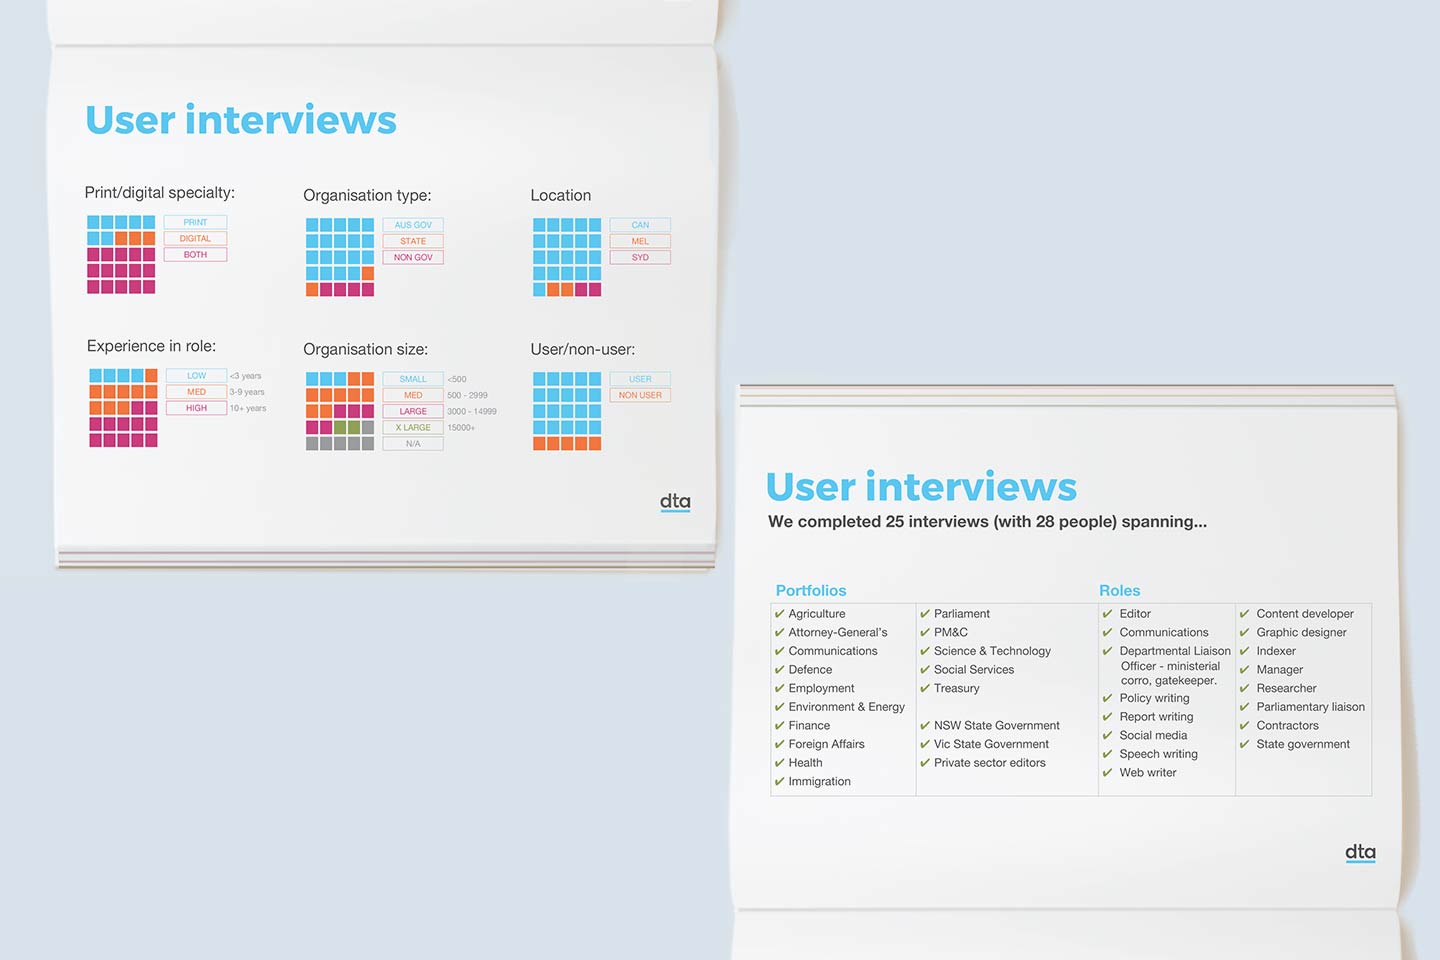 A mock-up of two report pages. The first page shows the breakdown of user interviews data. This data include organisation type, experience in role and location. The second page lists the portfolios and roles of users we spoke to. Portfolios include finance, health and environment and energy. Roles include editors, policy writing and social media.  